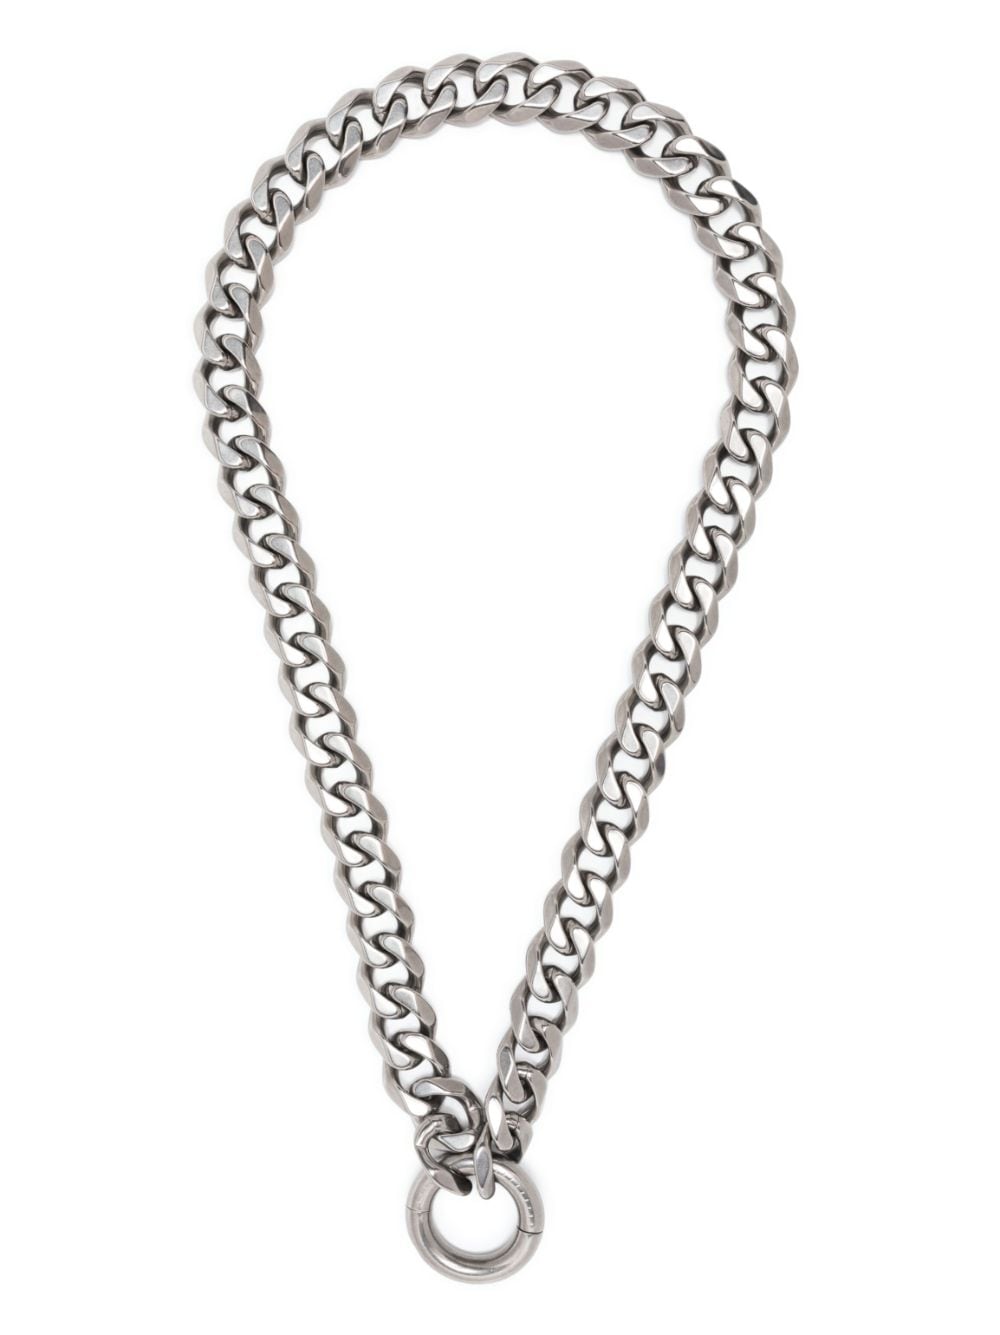 engraved-logo chain-link necklace